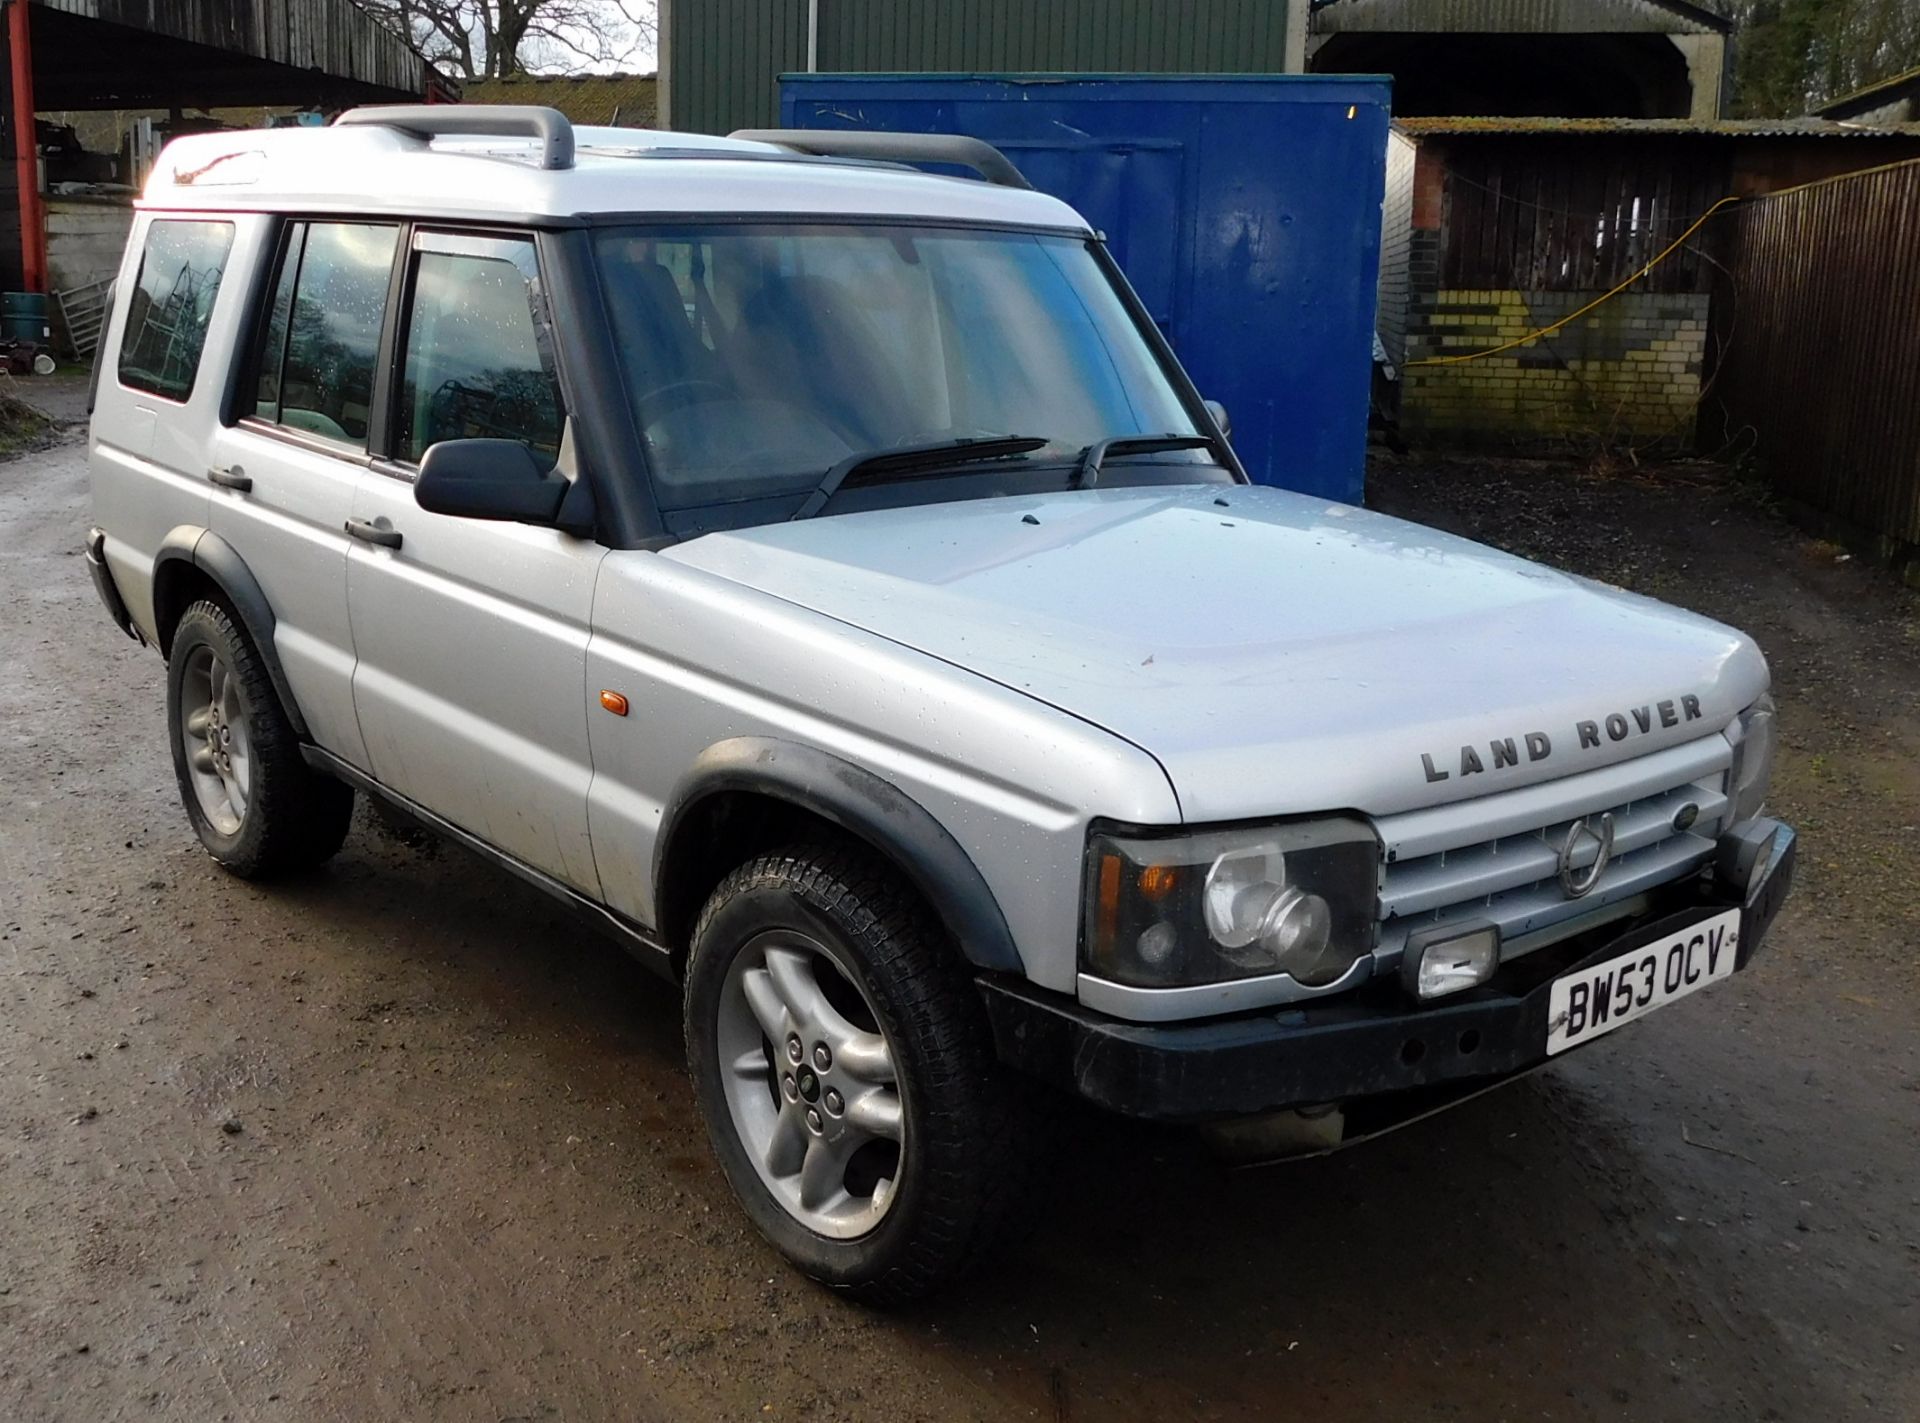 Land Rover Discovery, 2.5L Td5 ES Premium 7 Seat 5dr, Automatic, Registration BW53 OCV, First